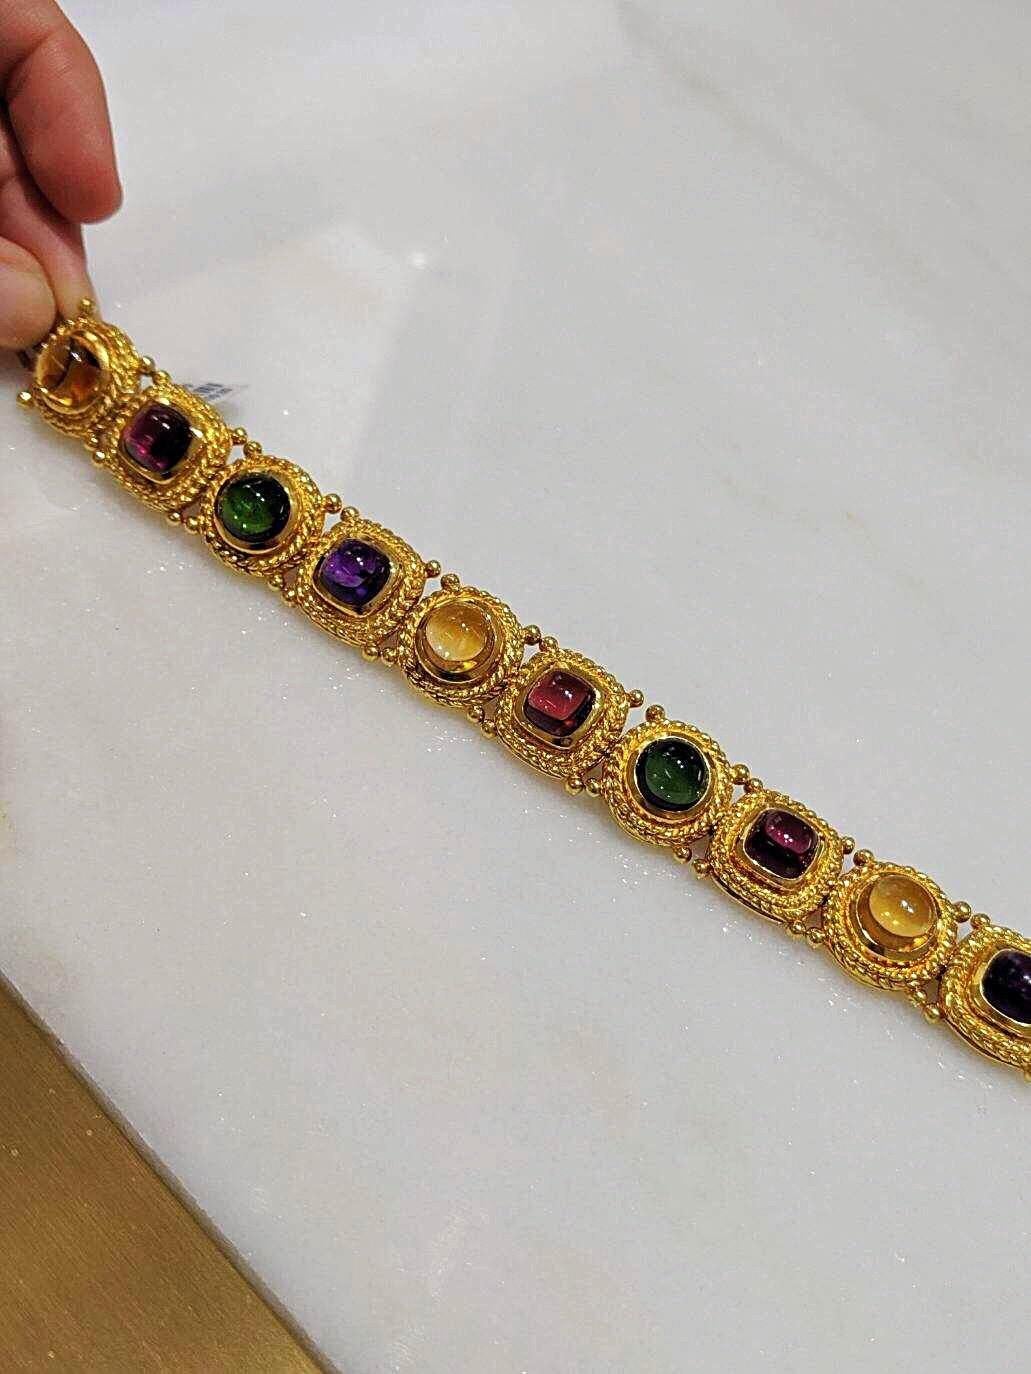 Jeffrey Stevens 18 Karat Gold and Semi Precious Cabochon Gemstone Bracelet In New Condition For Sale In New York, NY